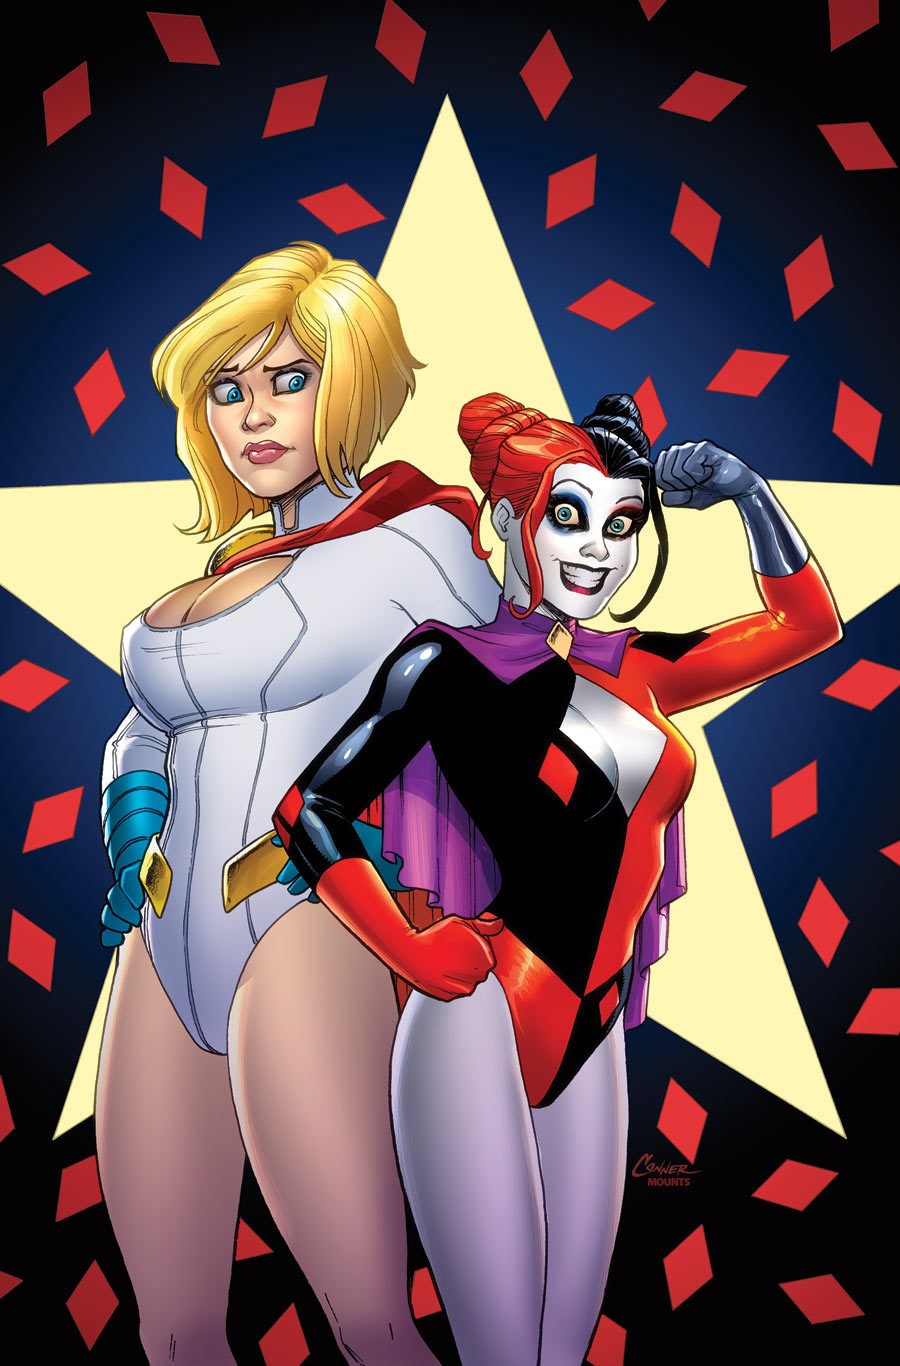 HARLEY QUINN #11 cover by Amanda Conner